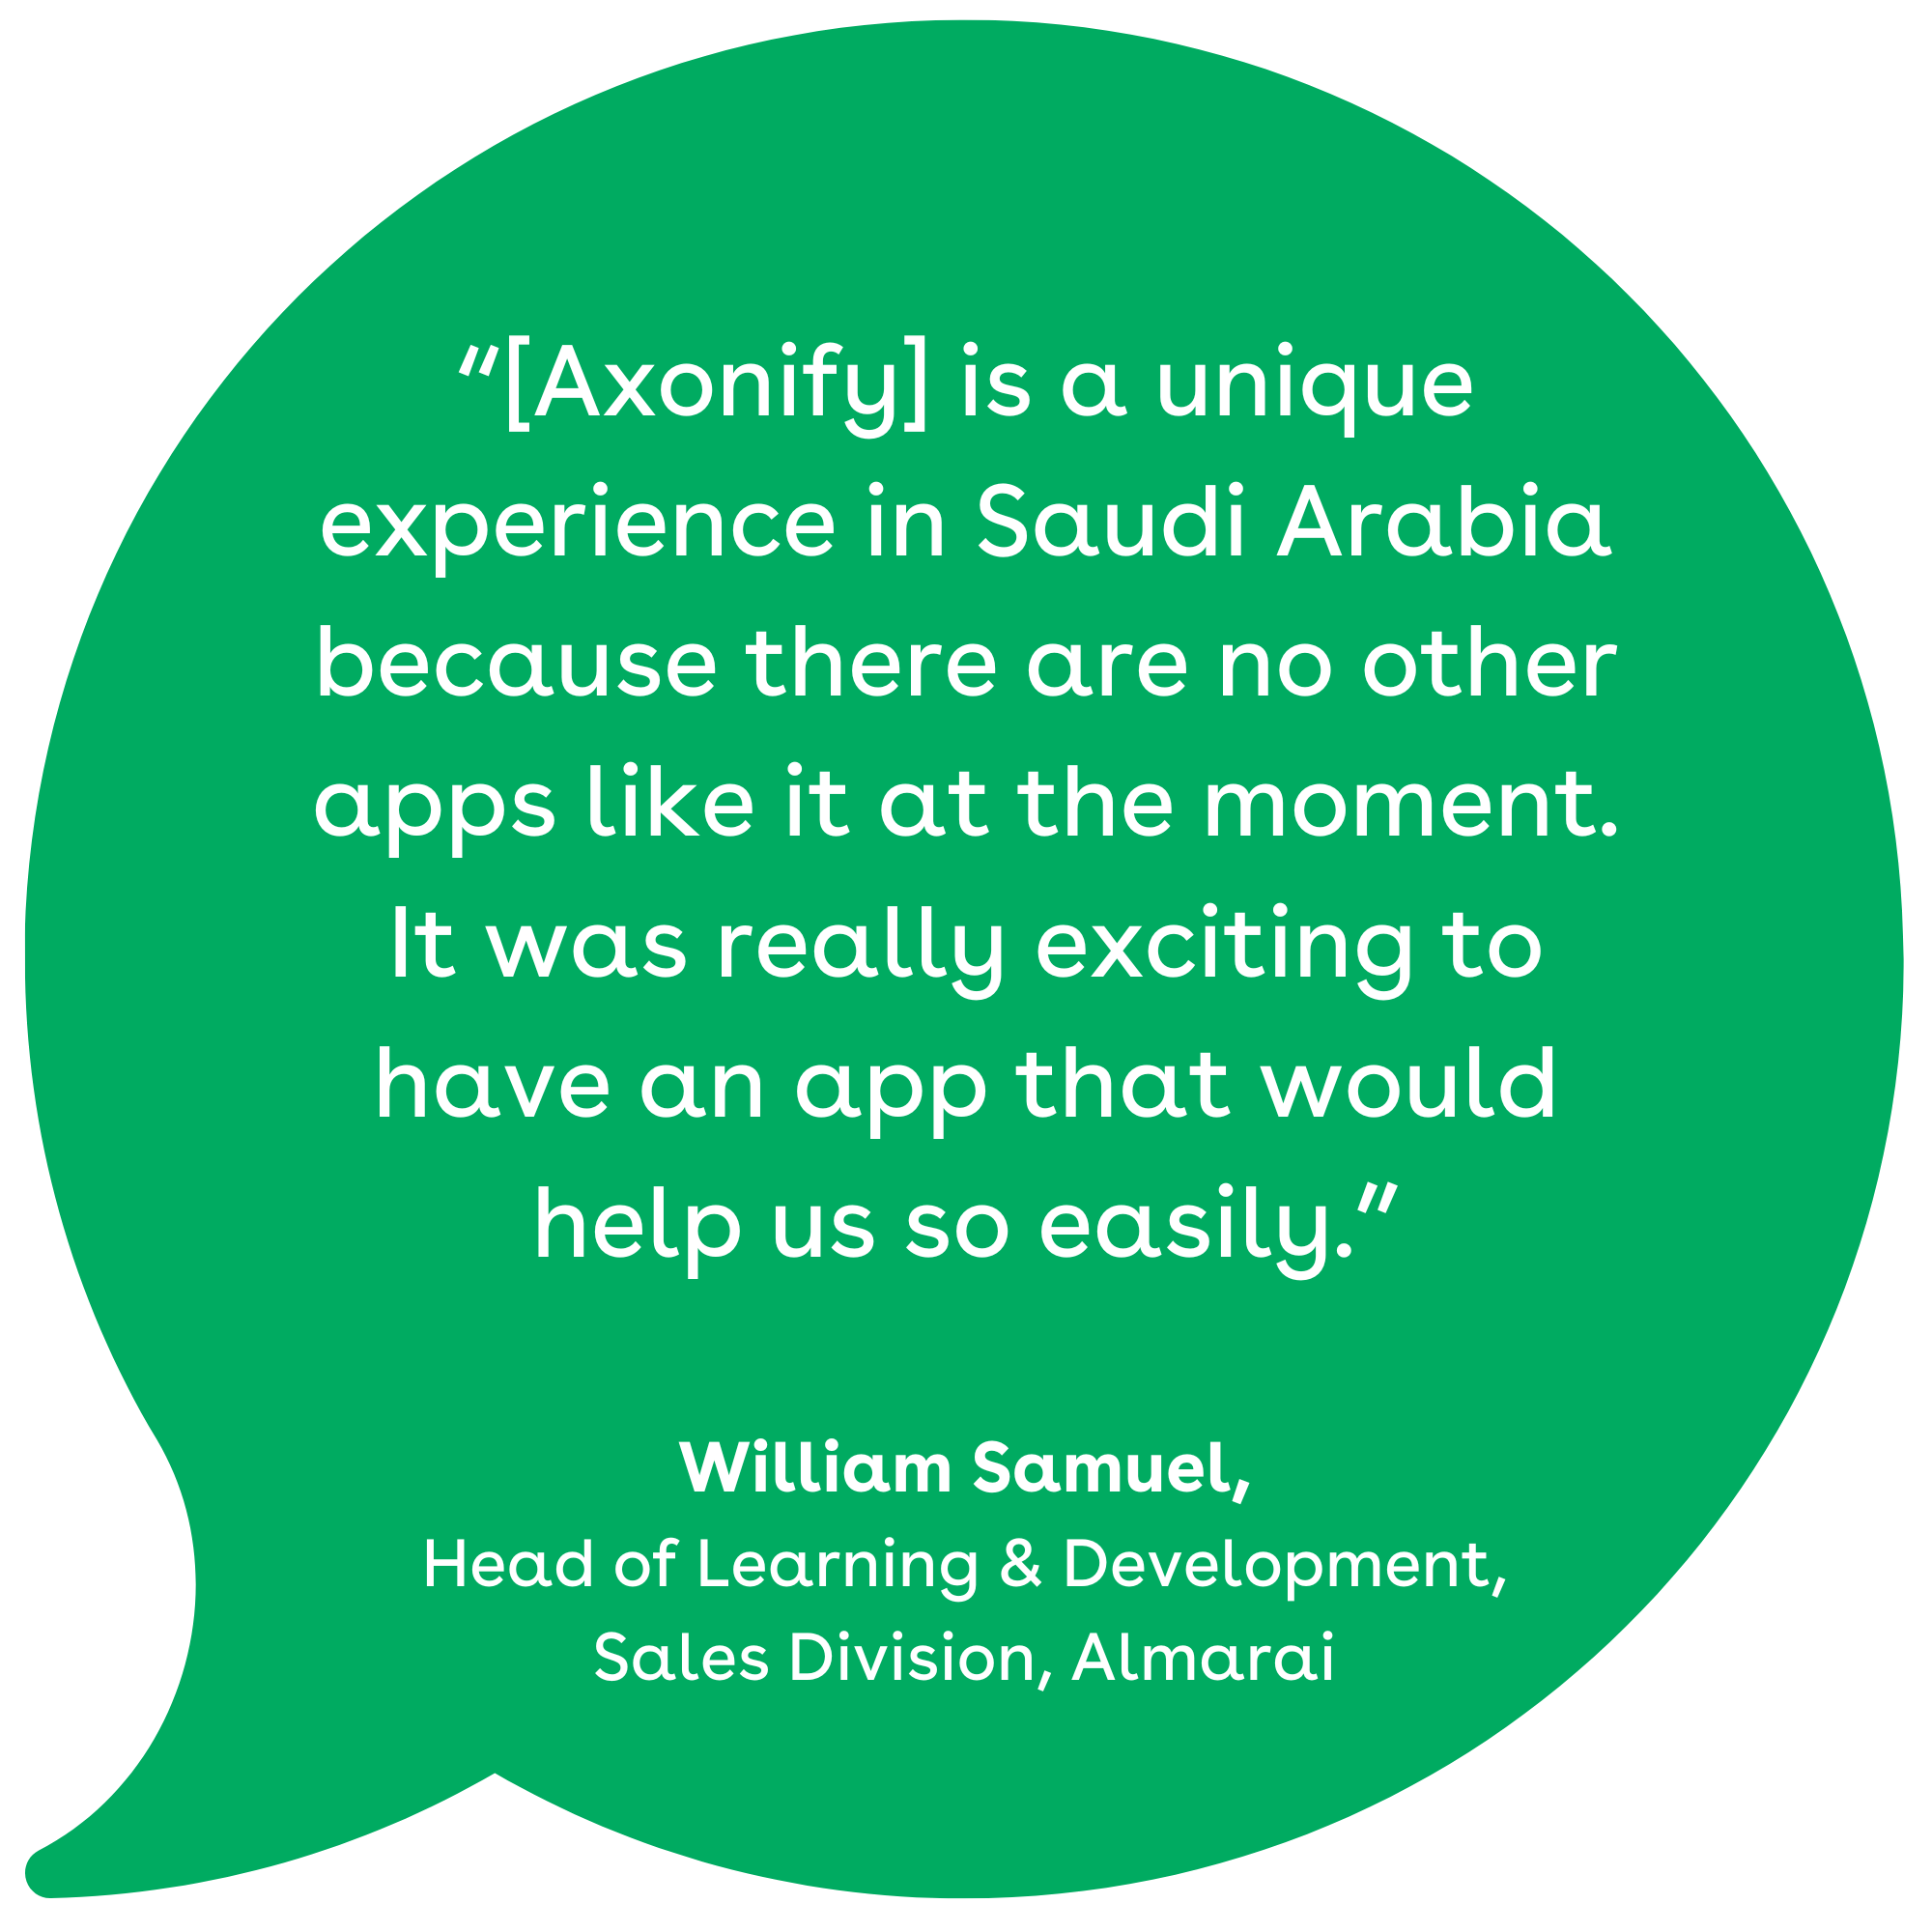 “[Axonify] is a unique experience in Saudi Arabia because there are no other apps like it at the moment. It was really exciting to have an app that would help us so easily.” William Samuel, Head of Learning & Development, Sales Division, Almarai